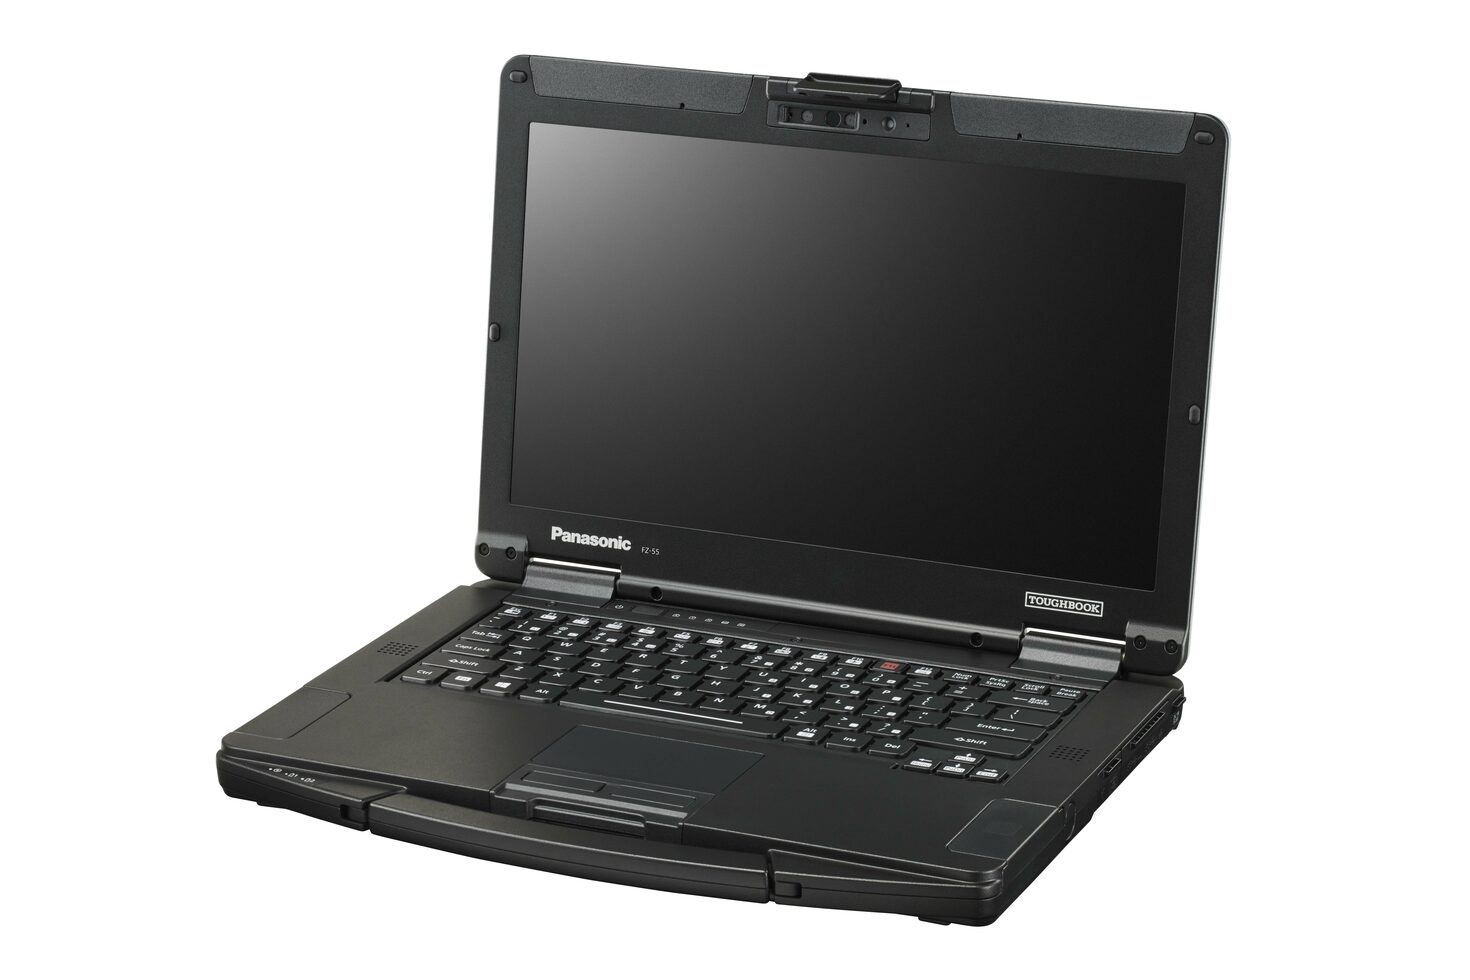 TOUGHBOOK 55 Porduct Image Data - Rugged Laptop